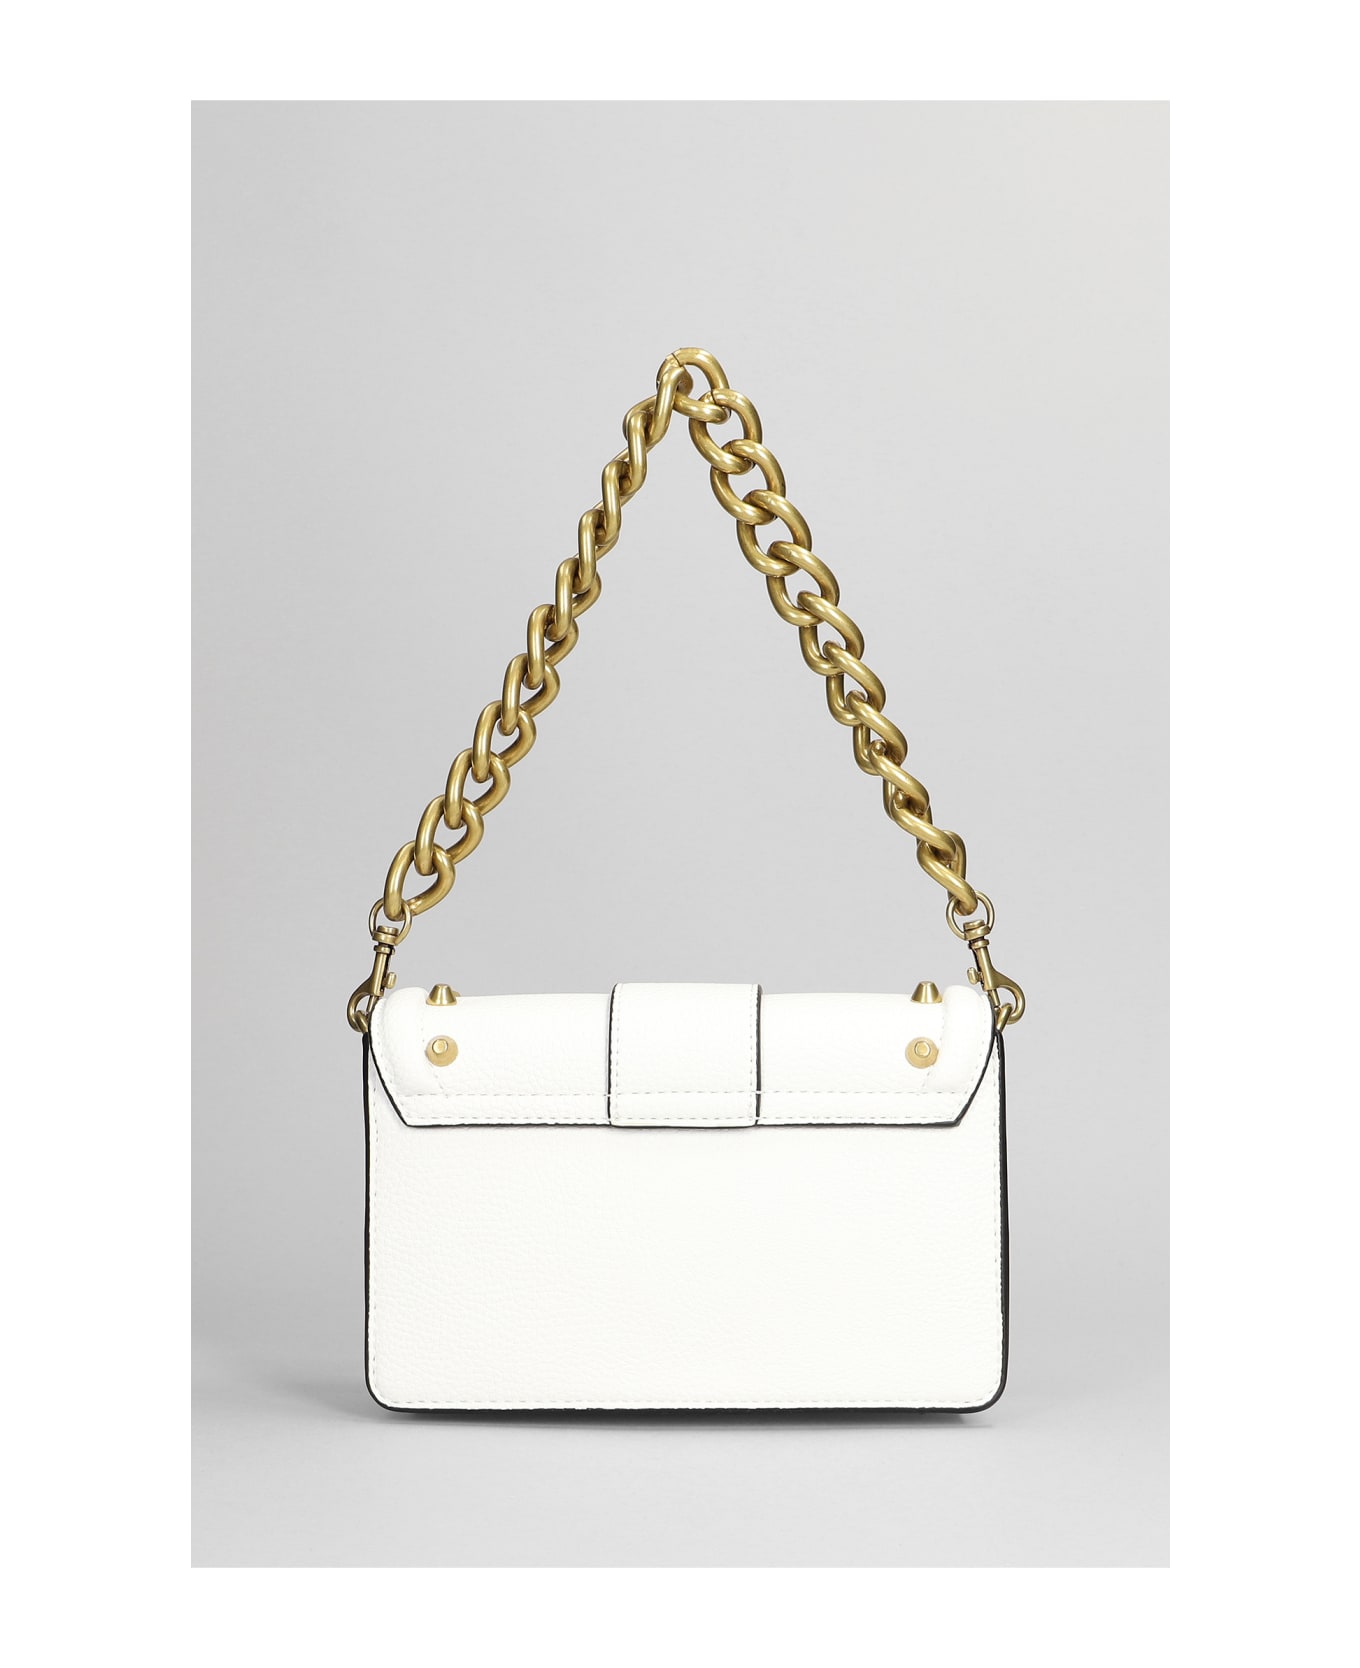 Versace Jeans Couture Bag - white